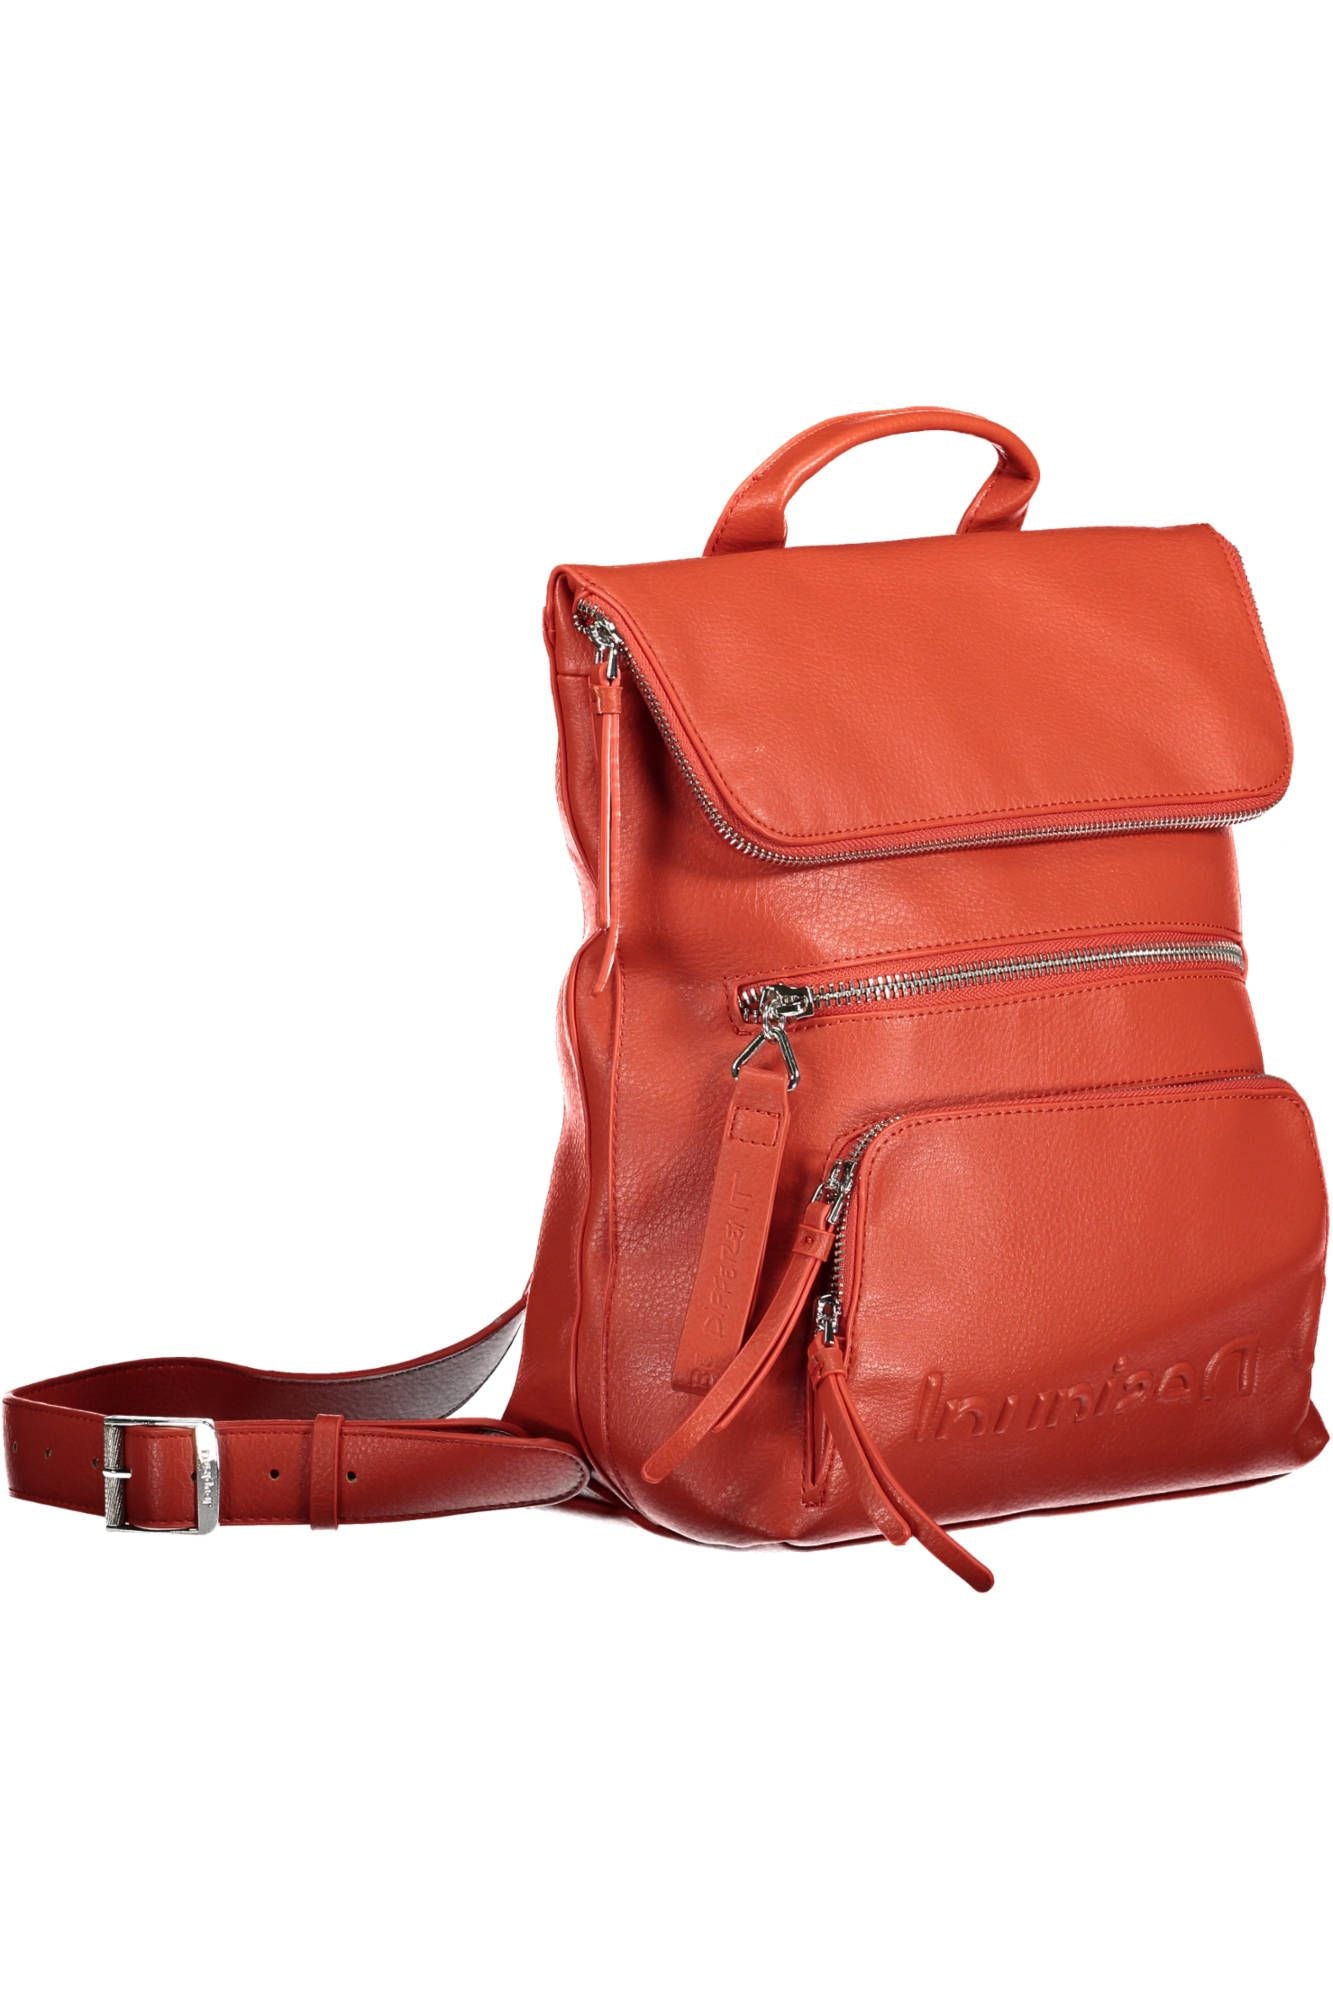 Vibrant Red Urban Backpack with Adjustable Straps